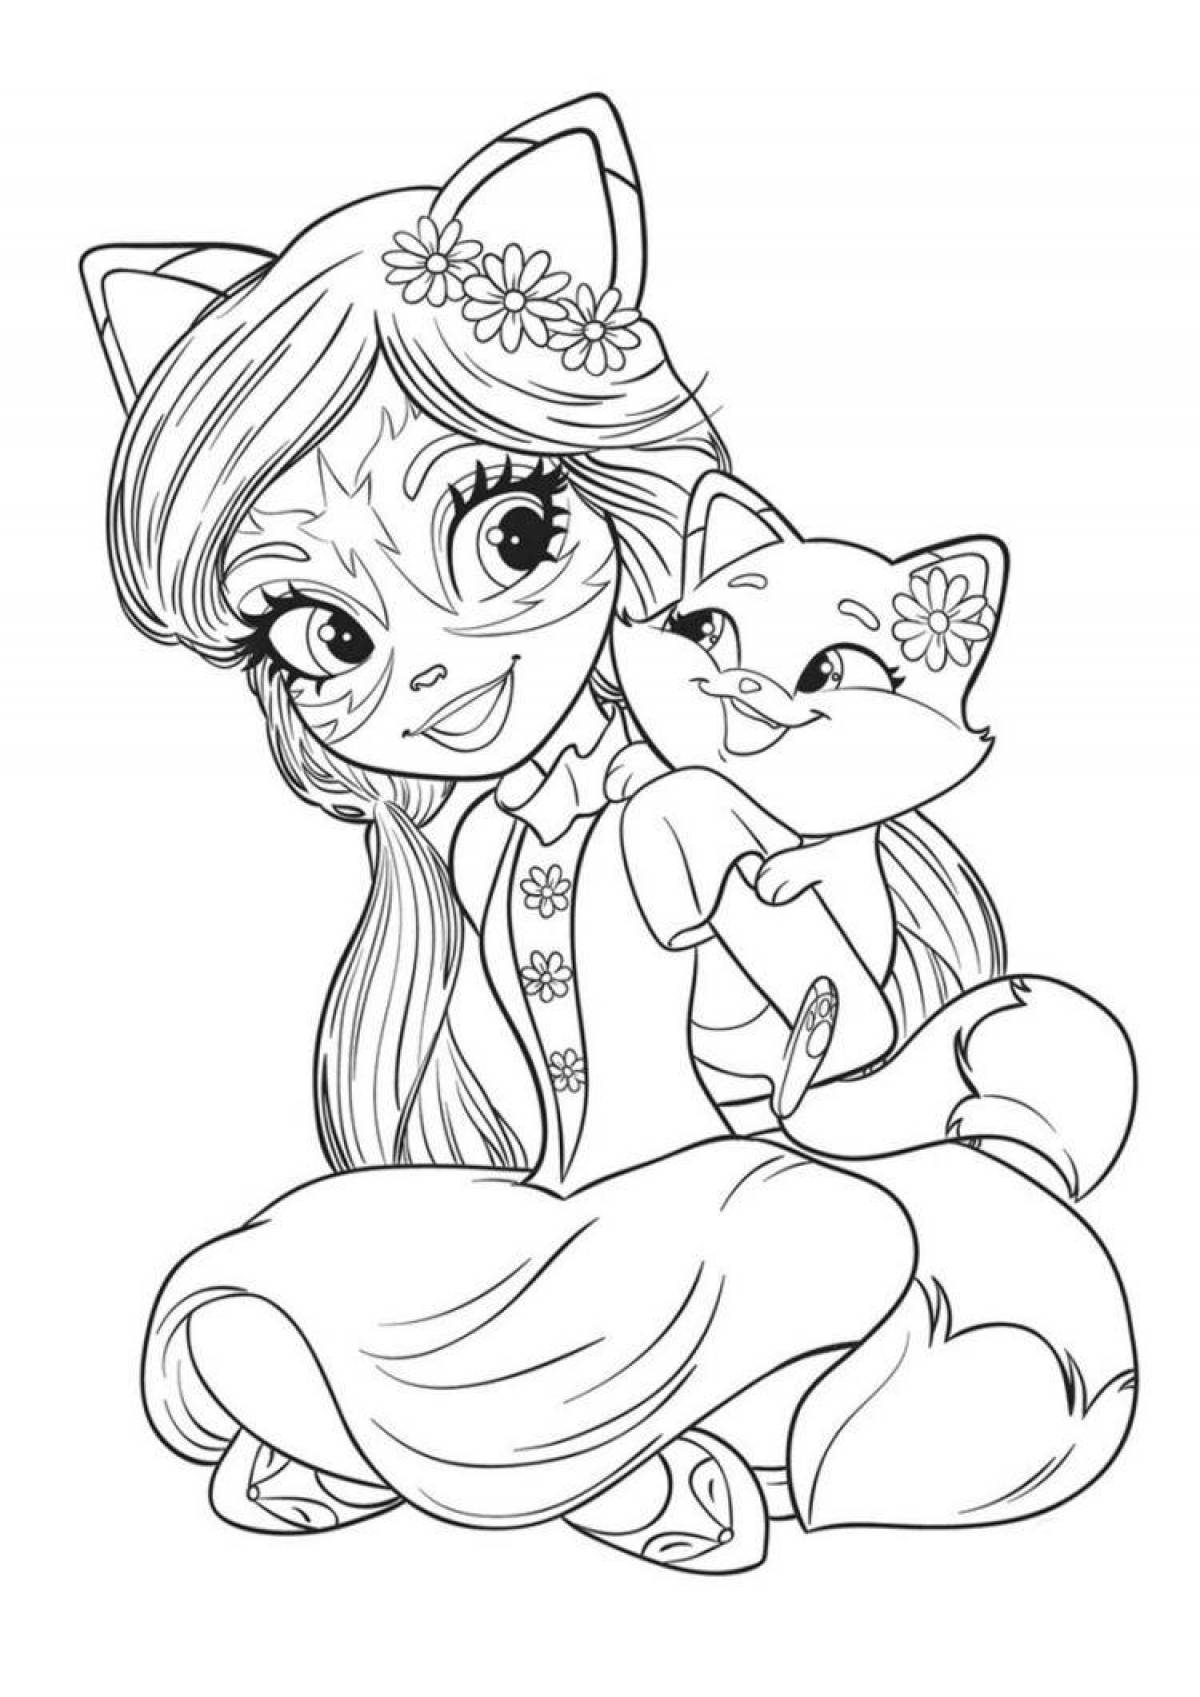 Coloring page gentle felicity cat